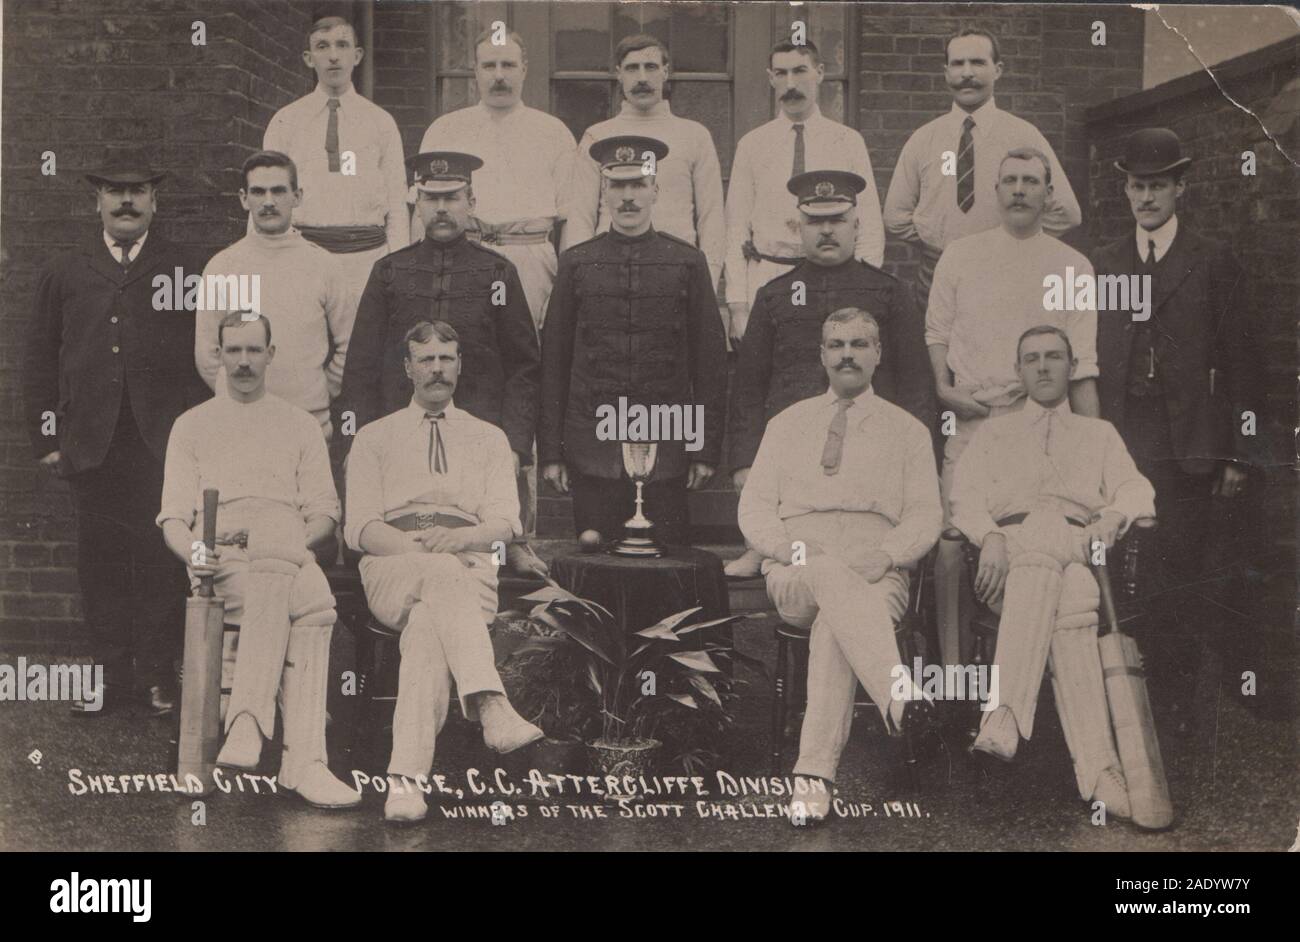 Vintage Photographic Postcard Showing The Sheffield City Police Cricket Club. Attercliffe Division. Winners of The Scott Challenge Cup in 1911. Stock Photo